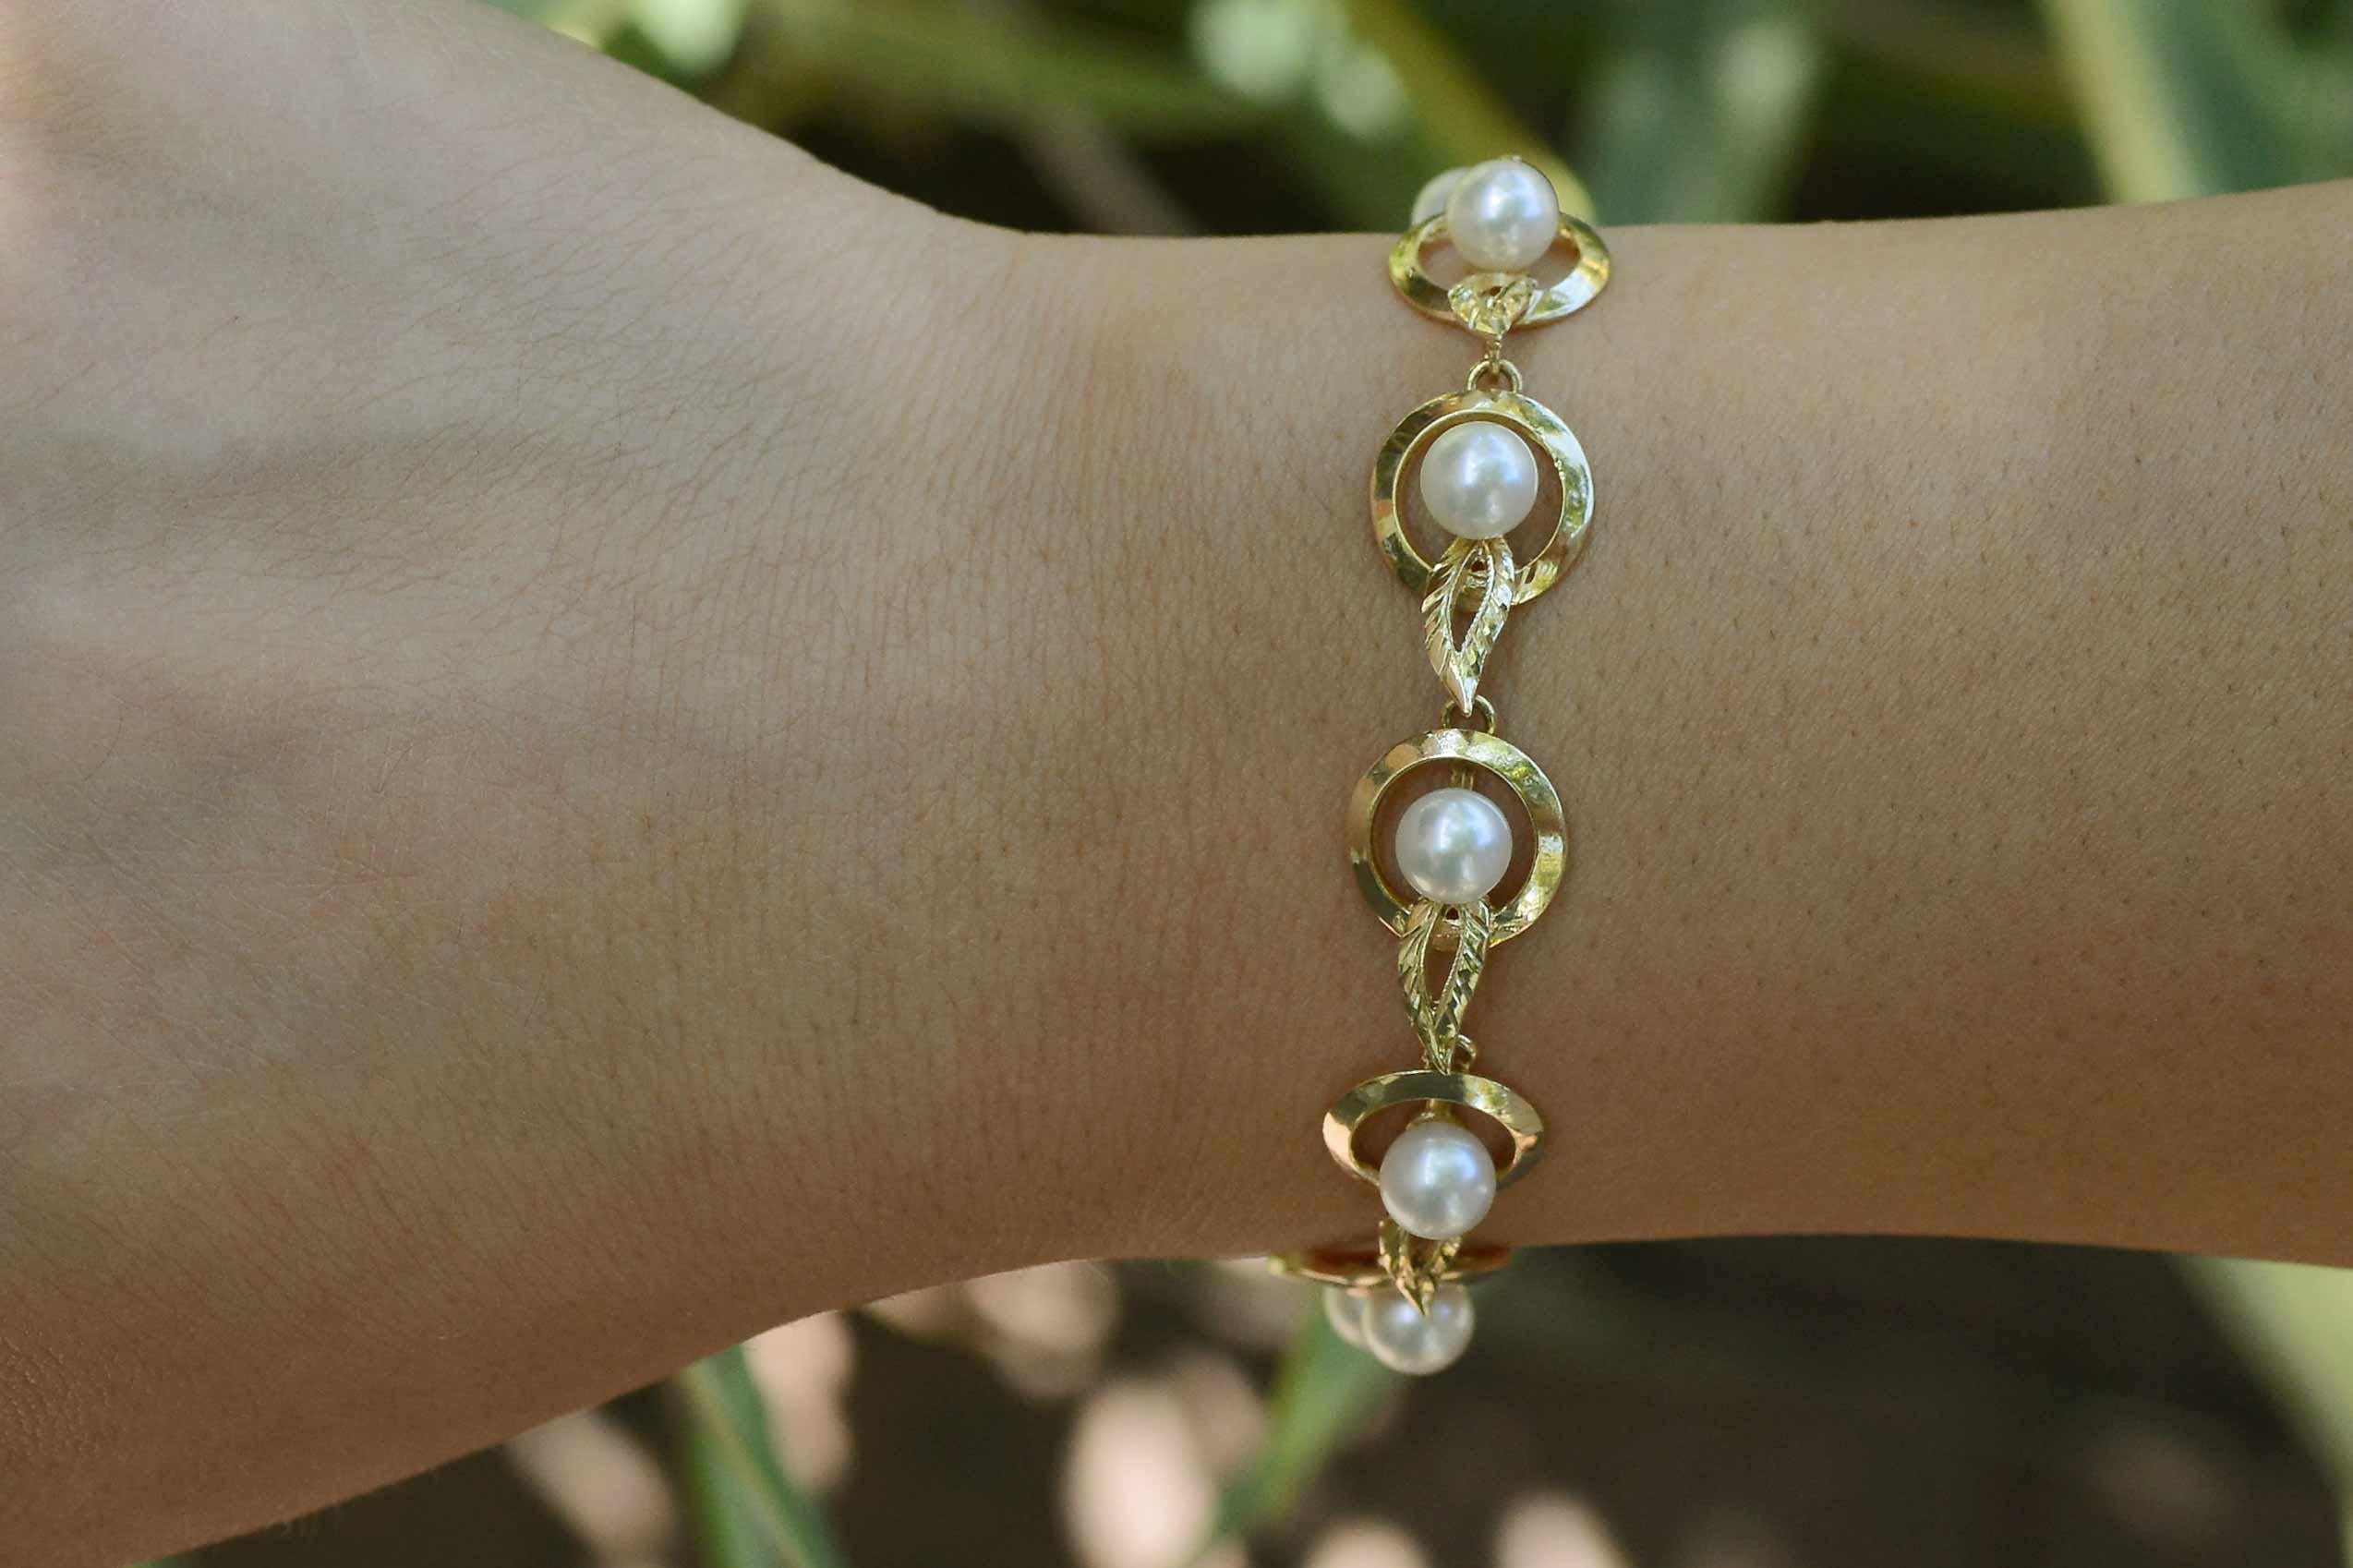 An alluring Art Deco pearl link bracelet of buttery, glowing yellow gold encircles your wrist with 11 perfectly round, top rose color cultured pearls. A clever take on the classic target design, this geometric wonder is embellished by engraved